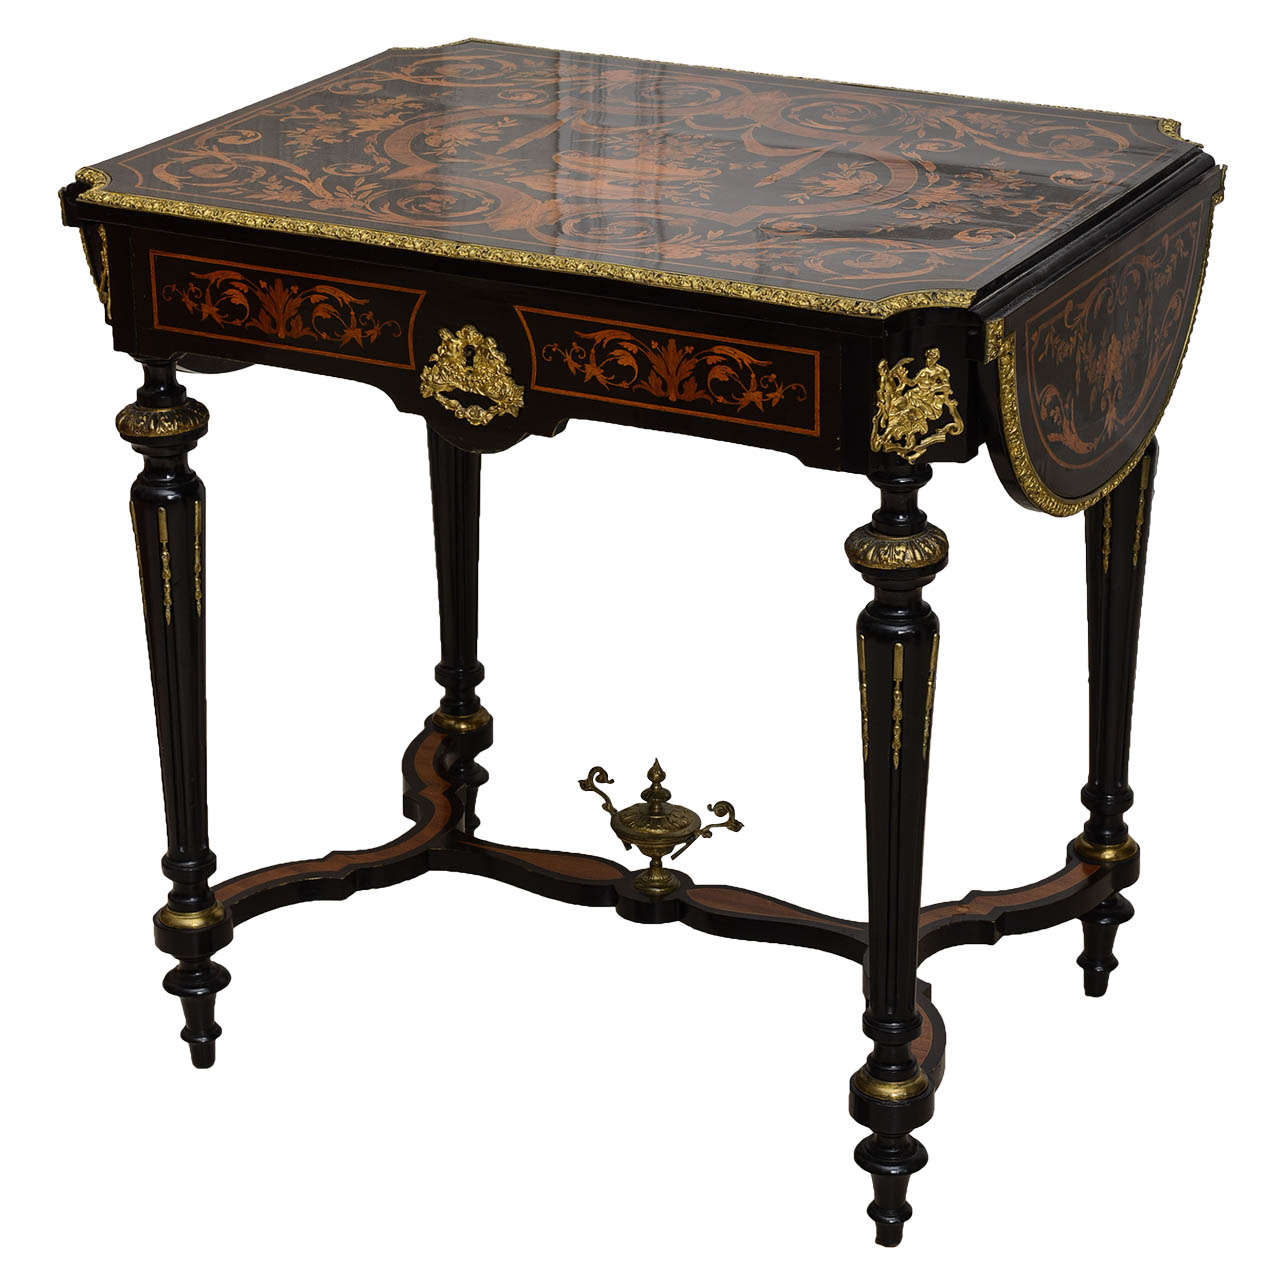 French Drop-Leaf Center Table, Vanity, or Desk from the 19th Century For Sale